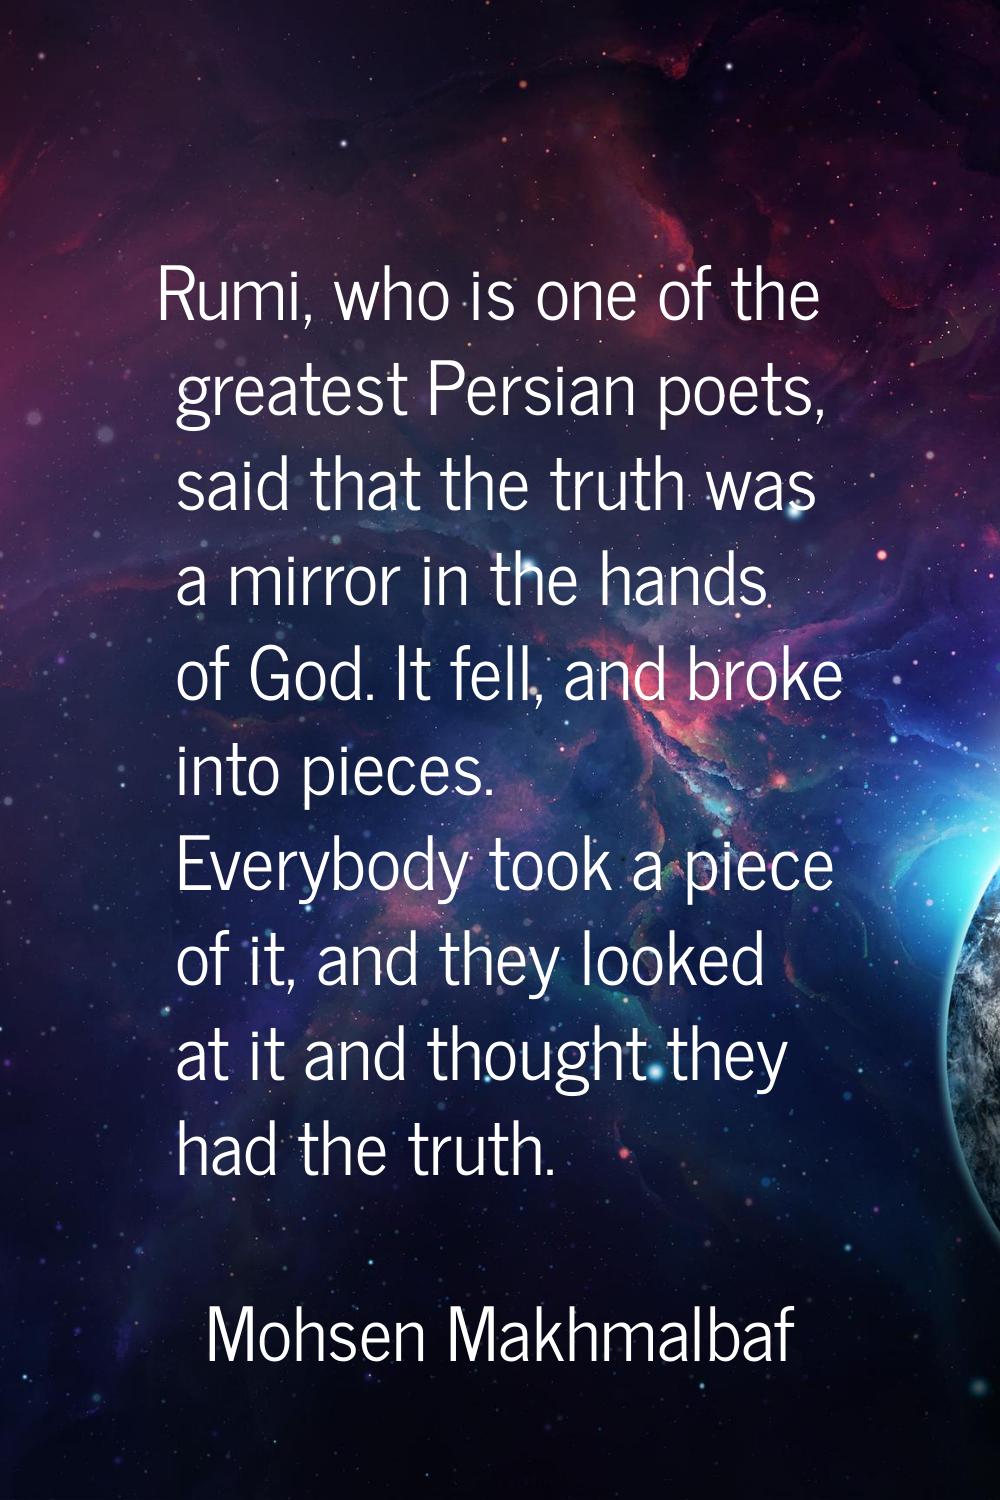 Rumi, who is one of the greatest Persian poets, said that the truth was a mirror in the hands of Go